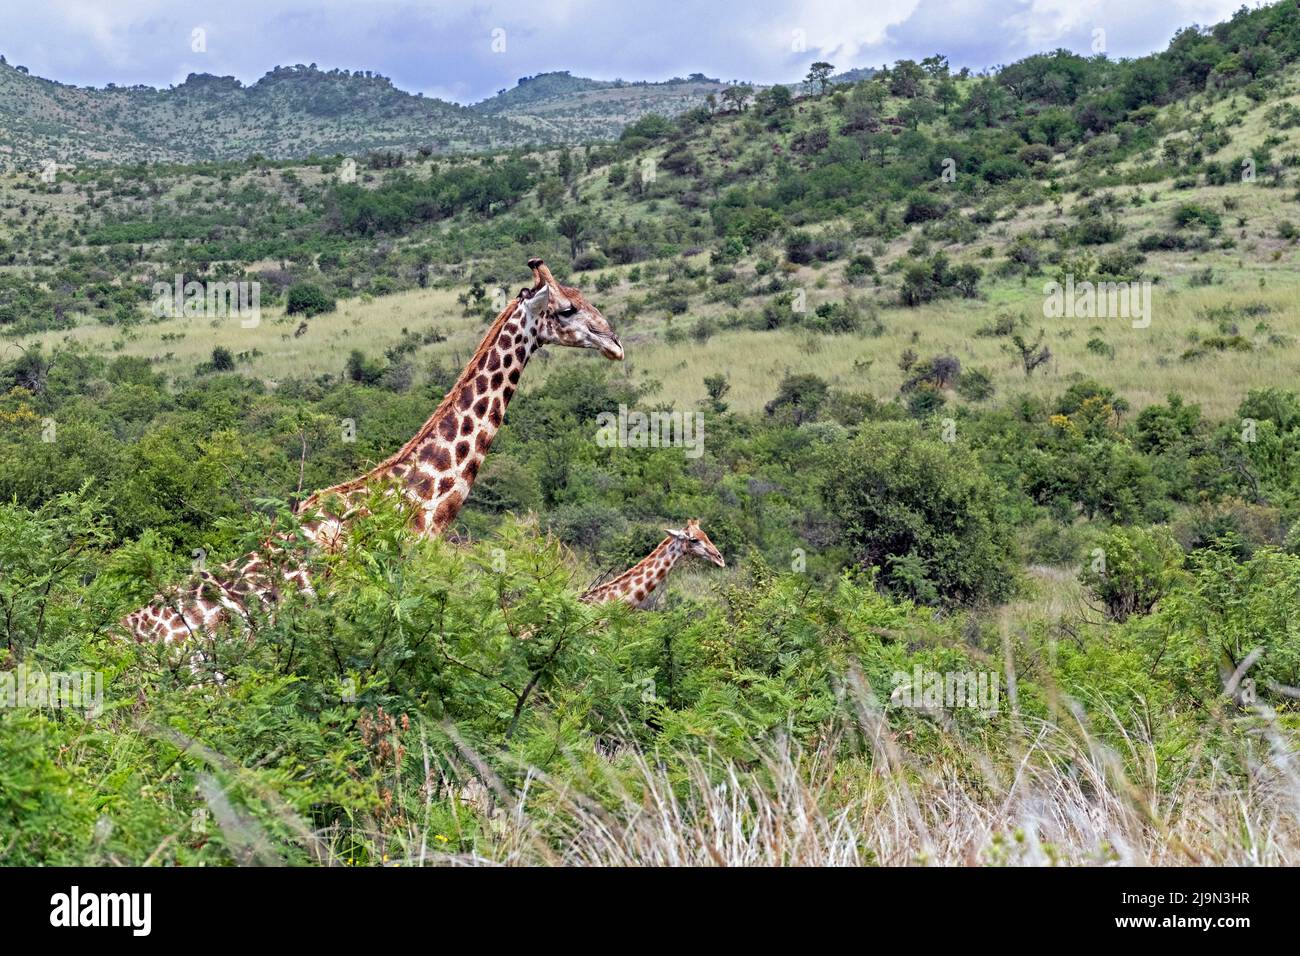 South African giraffe / Cape giraffe walking with calf on the savanna in the Pilanesberg National Park, North West Province, South Africa Stock Photo